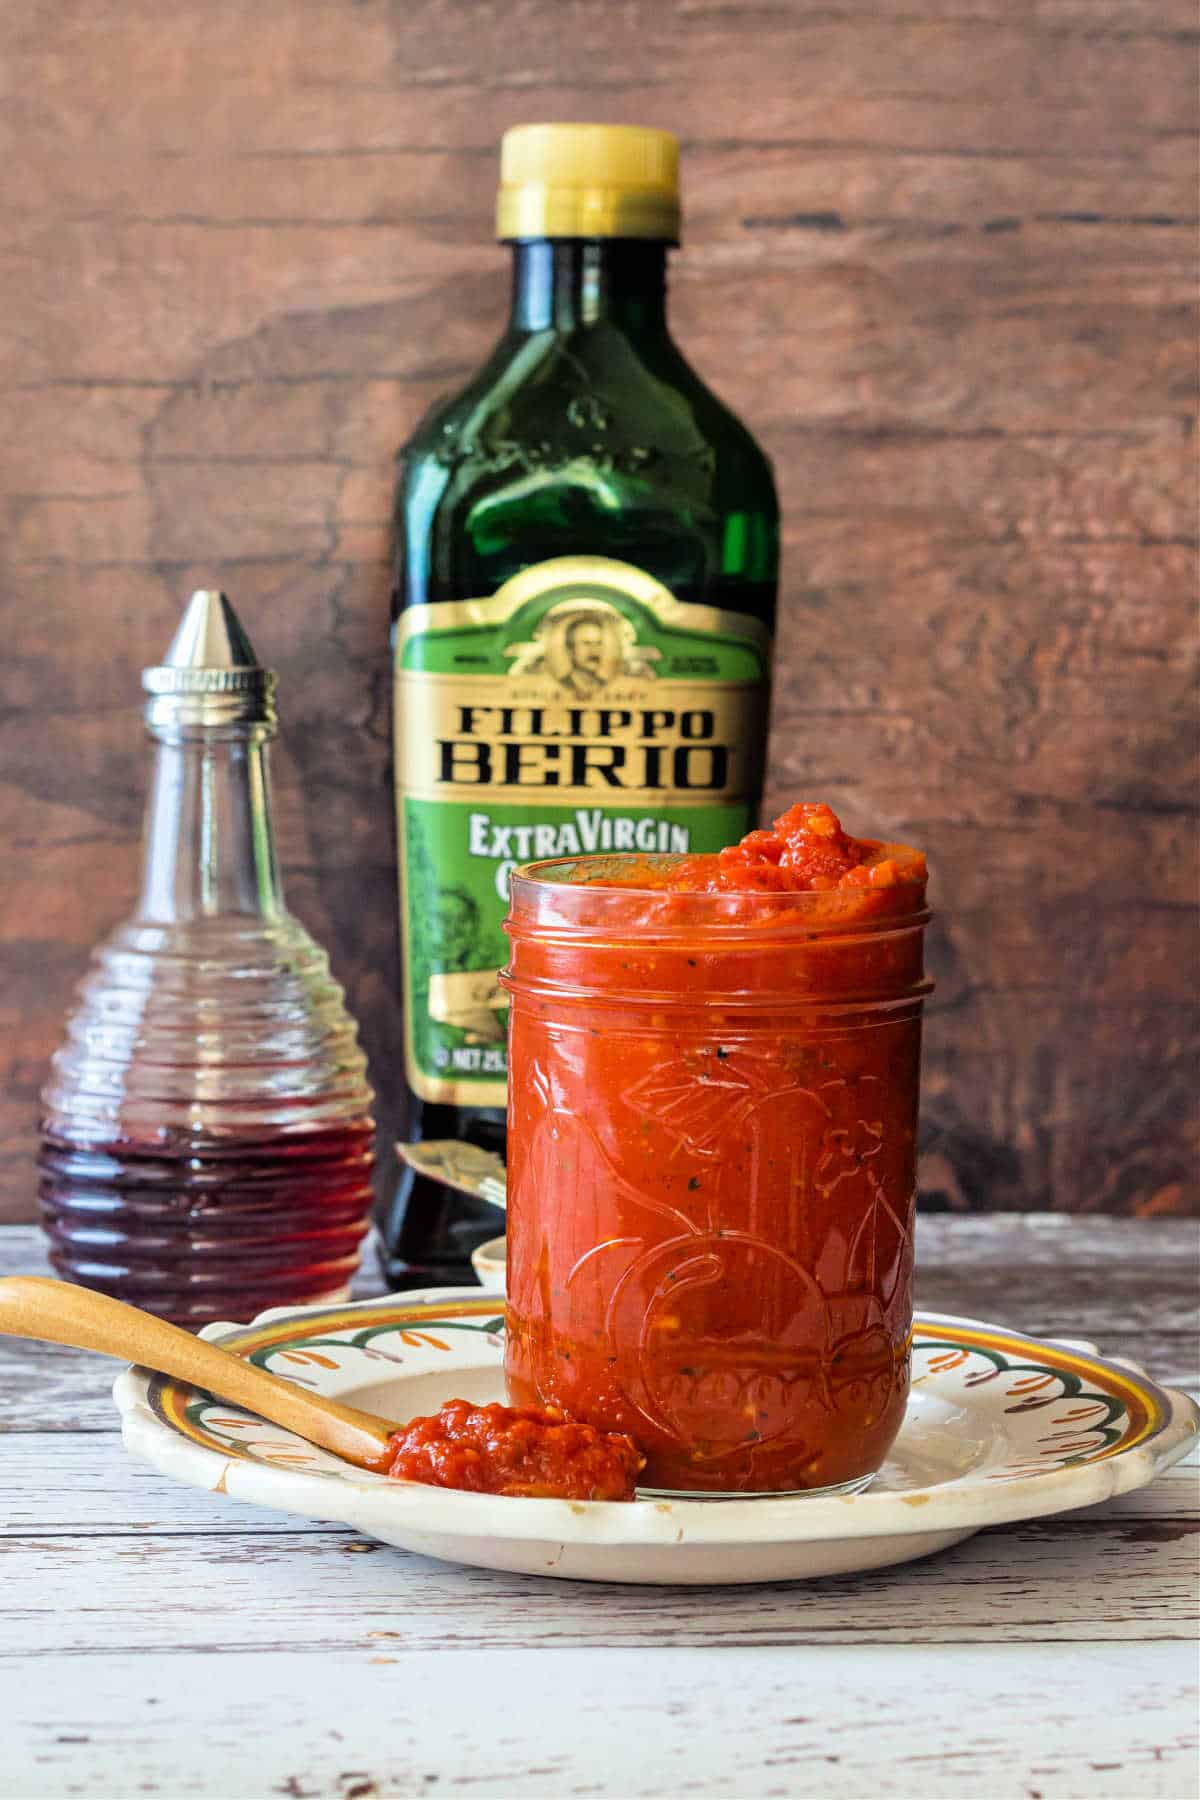 A glass jar of pizza sauce on a plate with a cruet of red wine vinegar and a large green bottle of olive oil behind it.